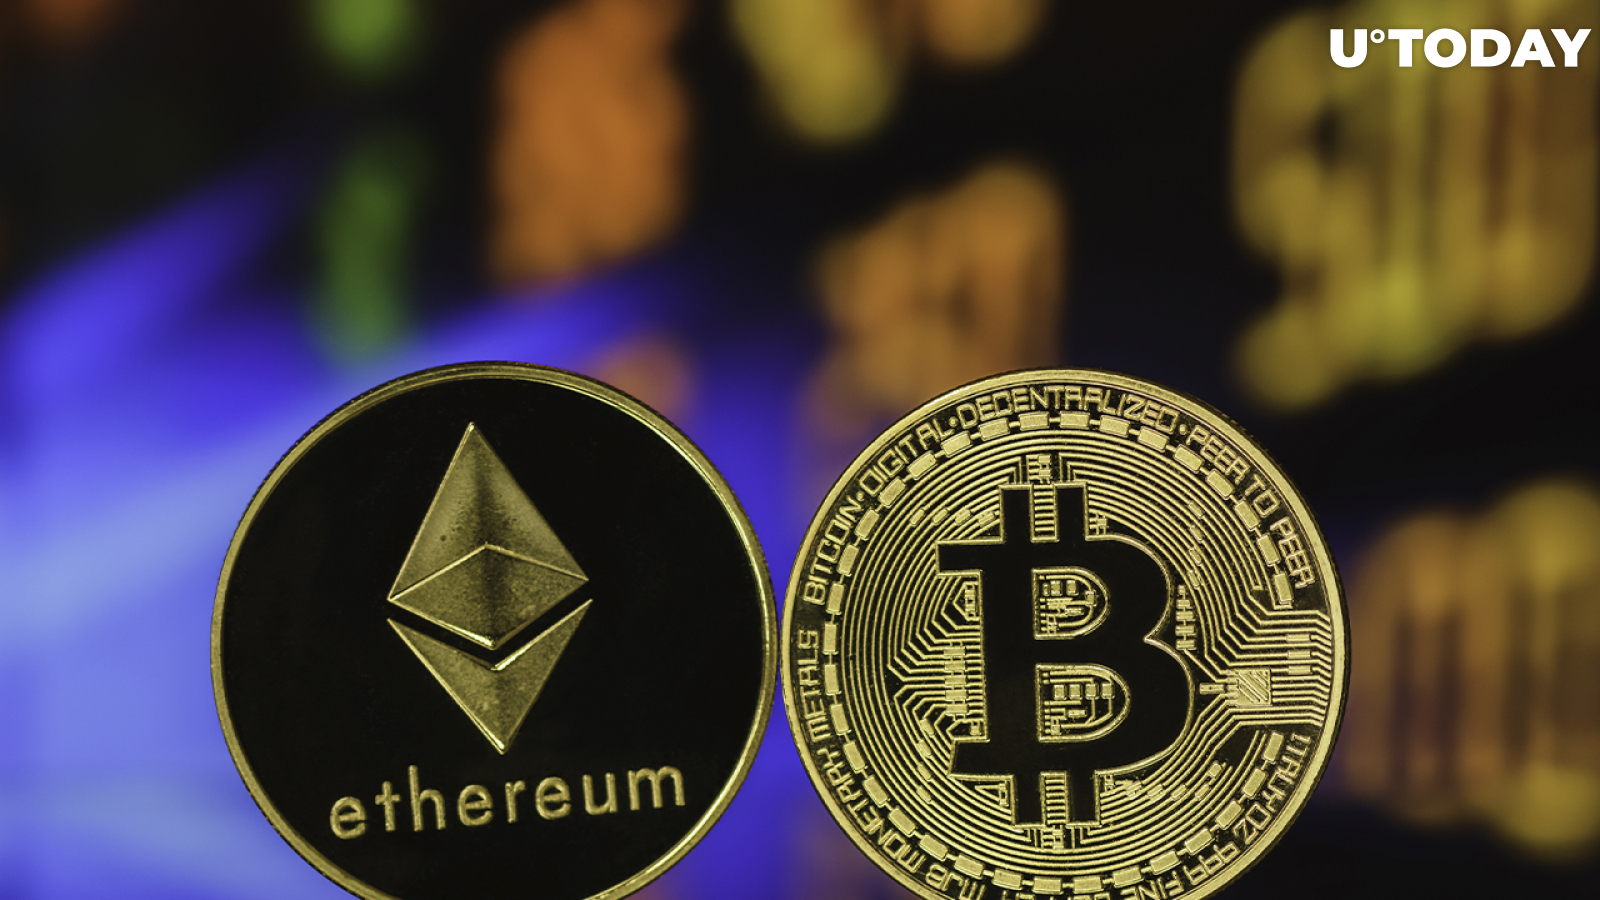 Bitcoin Dominance Surging Higher as Ethereum Underperforms